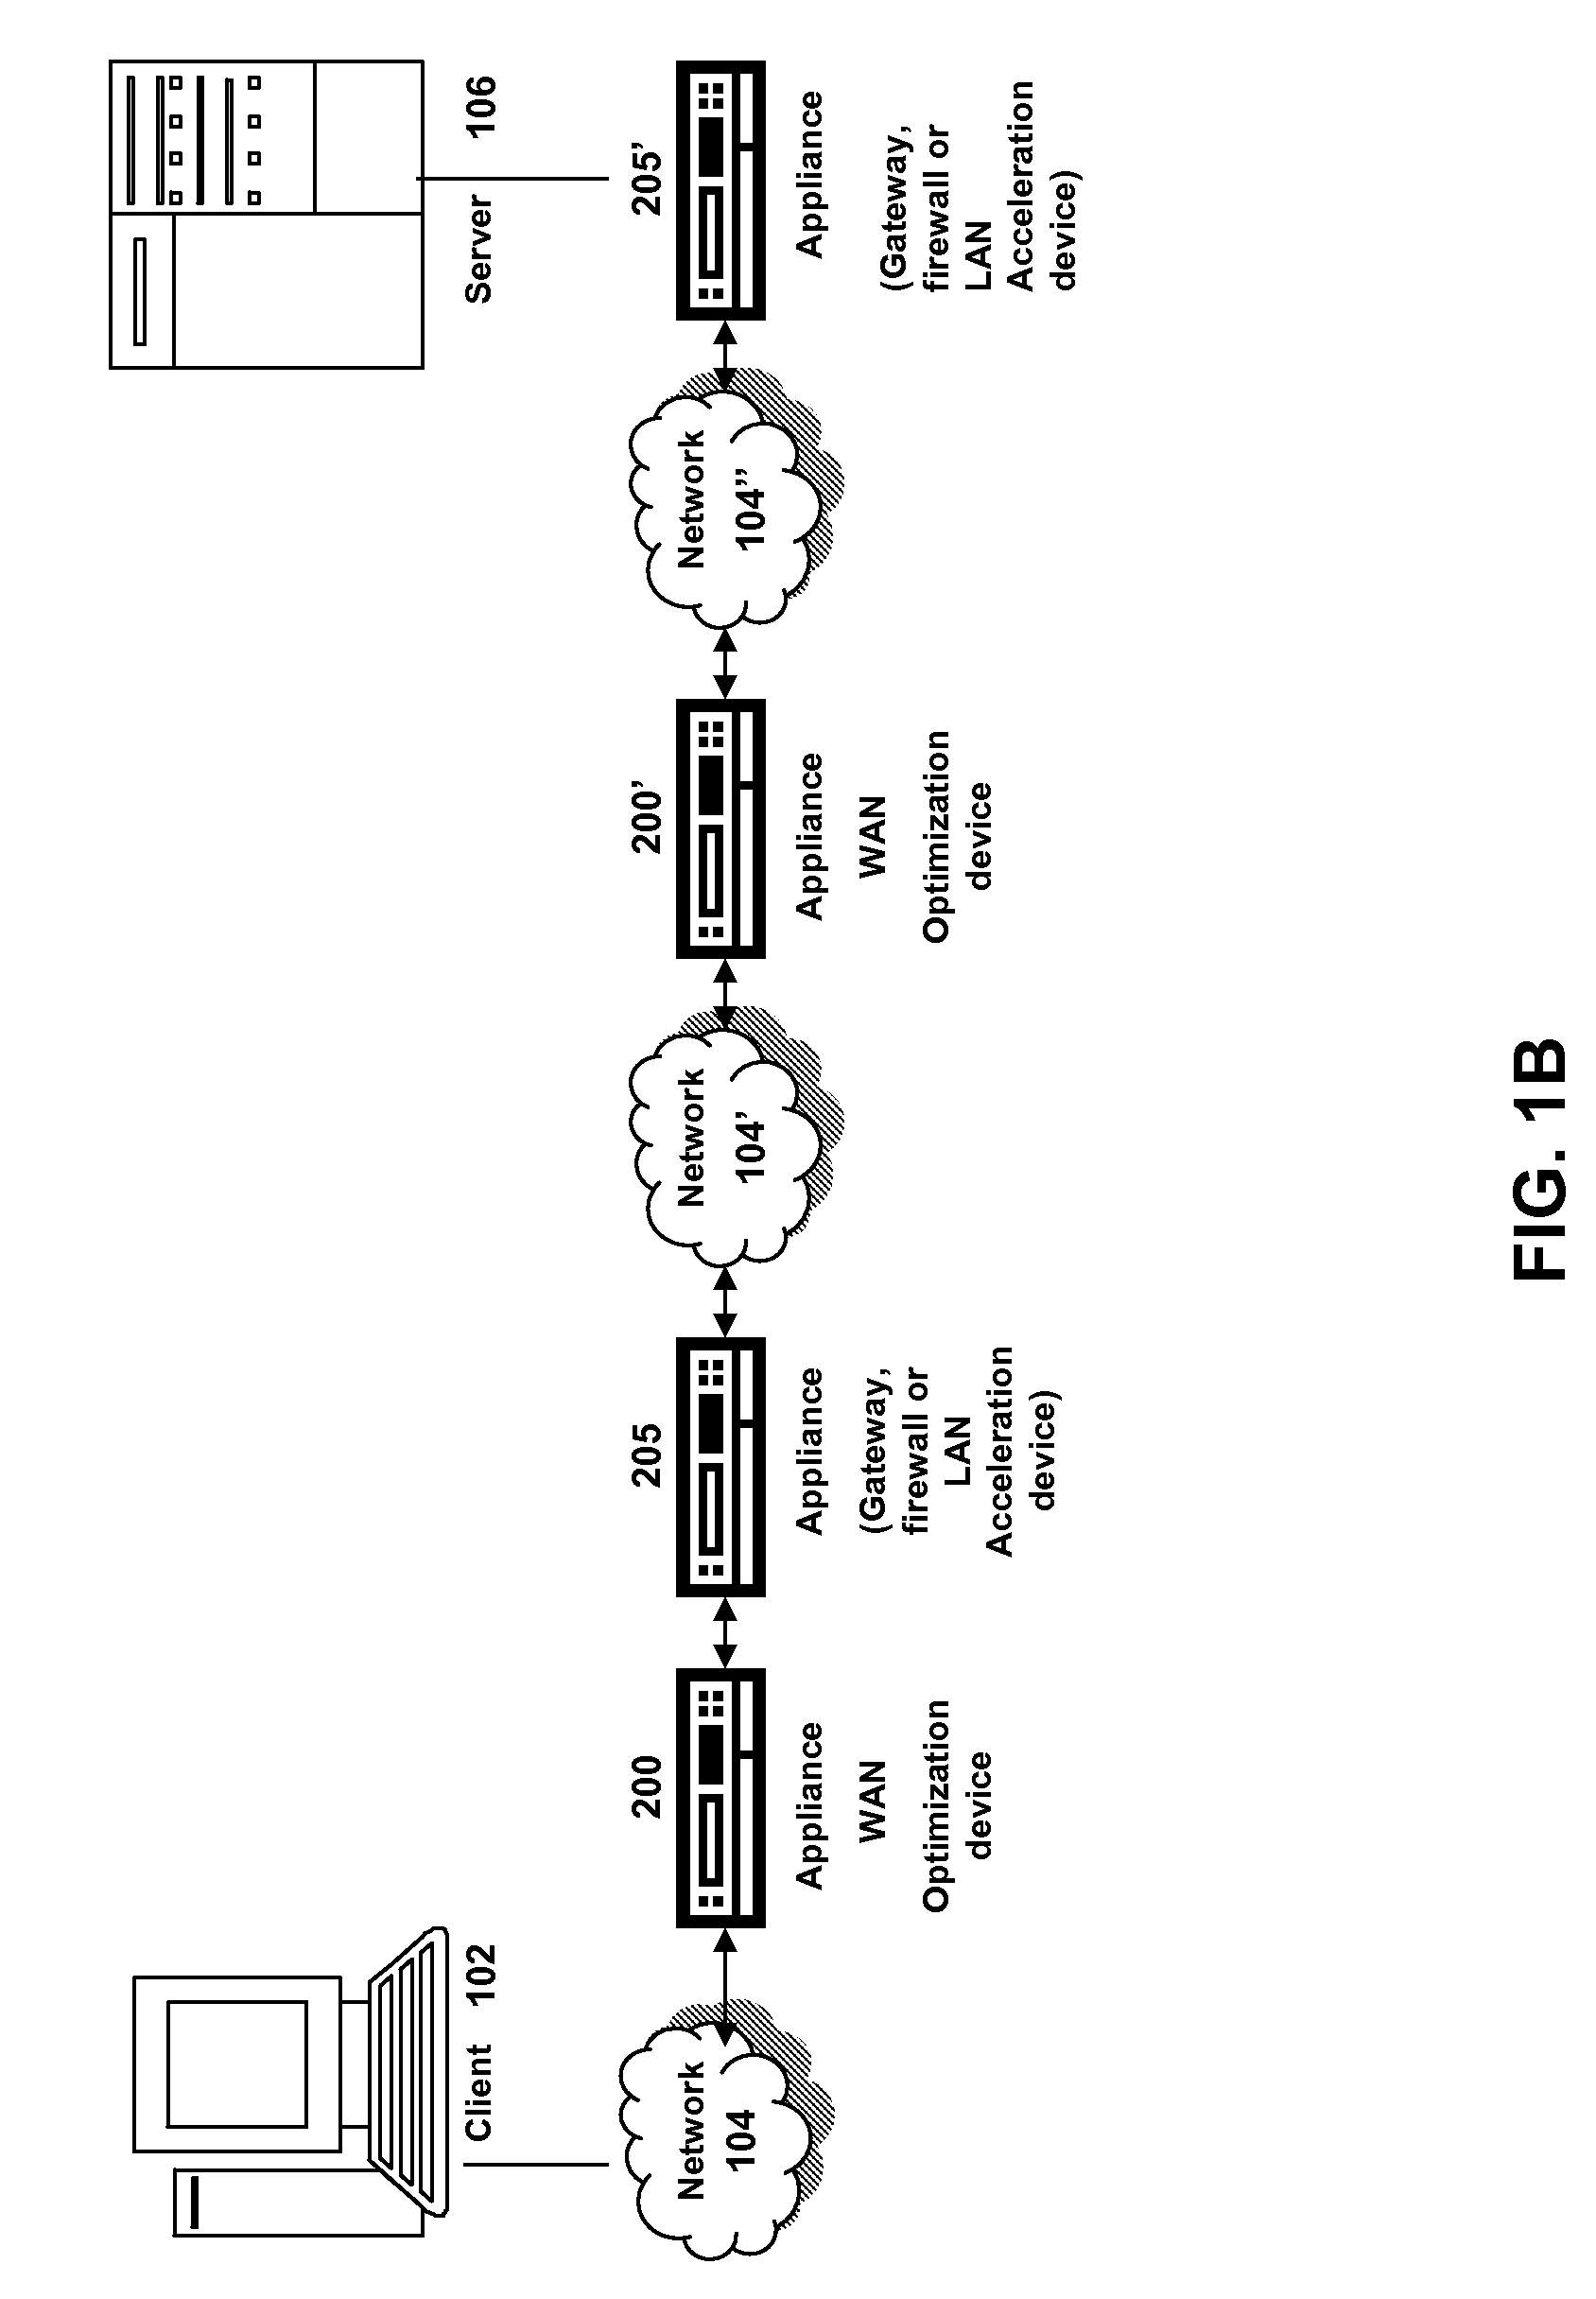 Systems and methods of revalidating cached objects in parallel with request for object